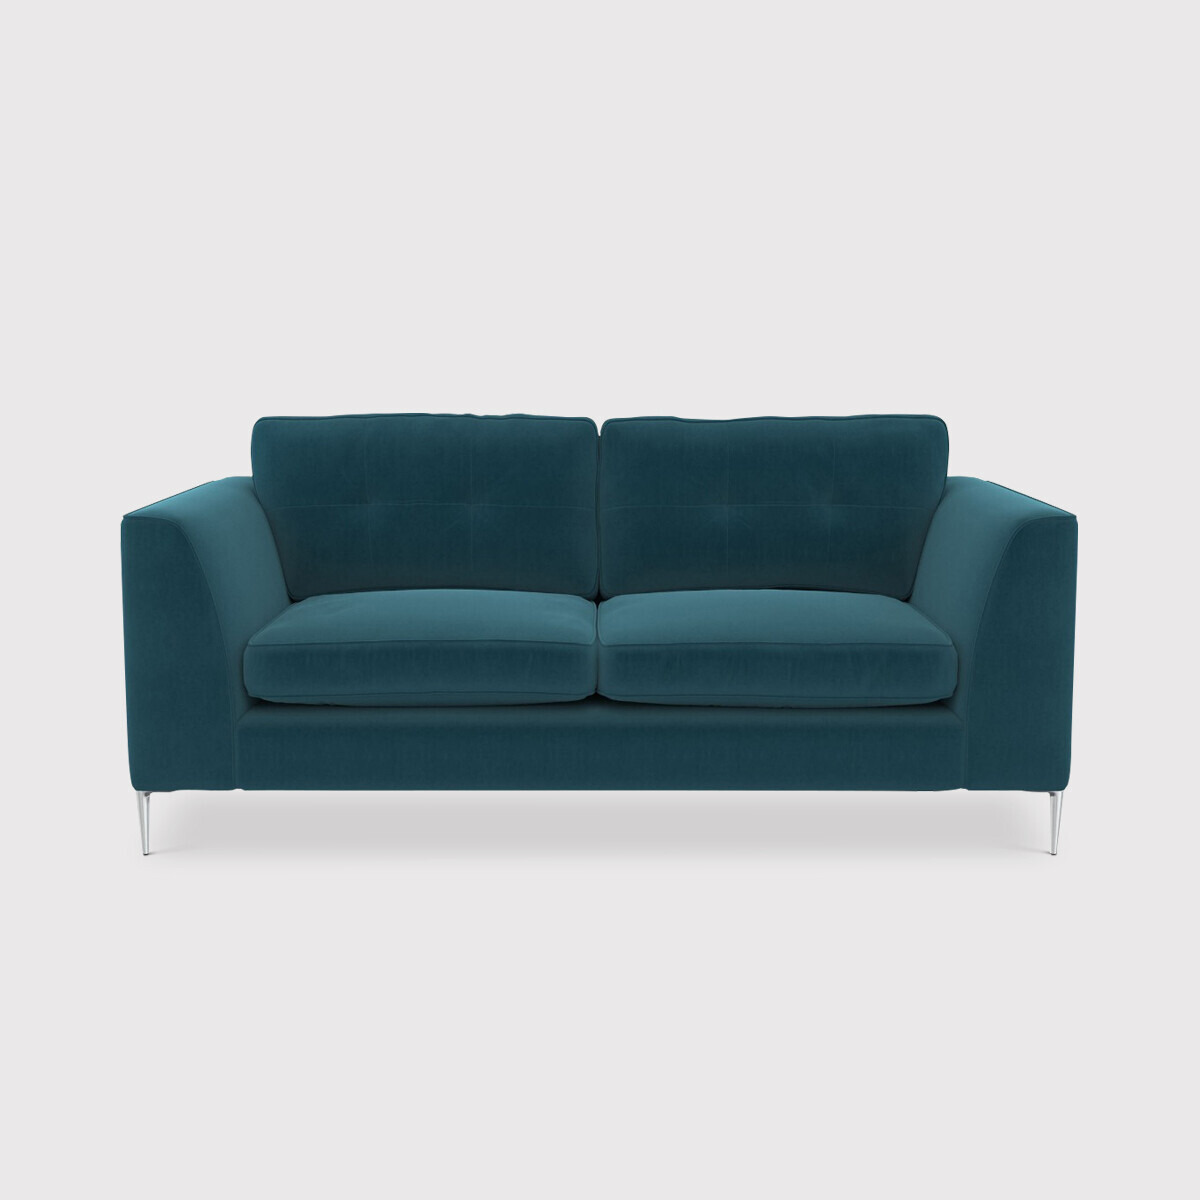 Conza Large Sofa, Teal Fabric - Barker & Stonehouse - image 1